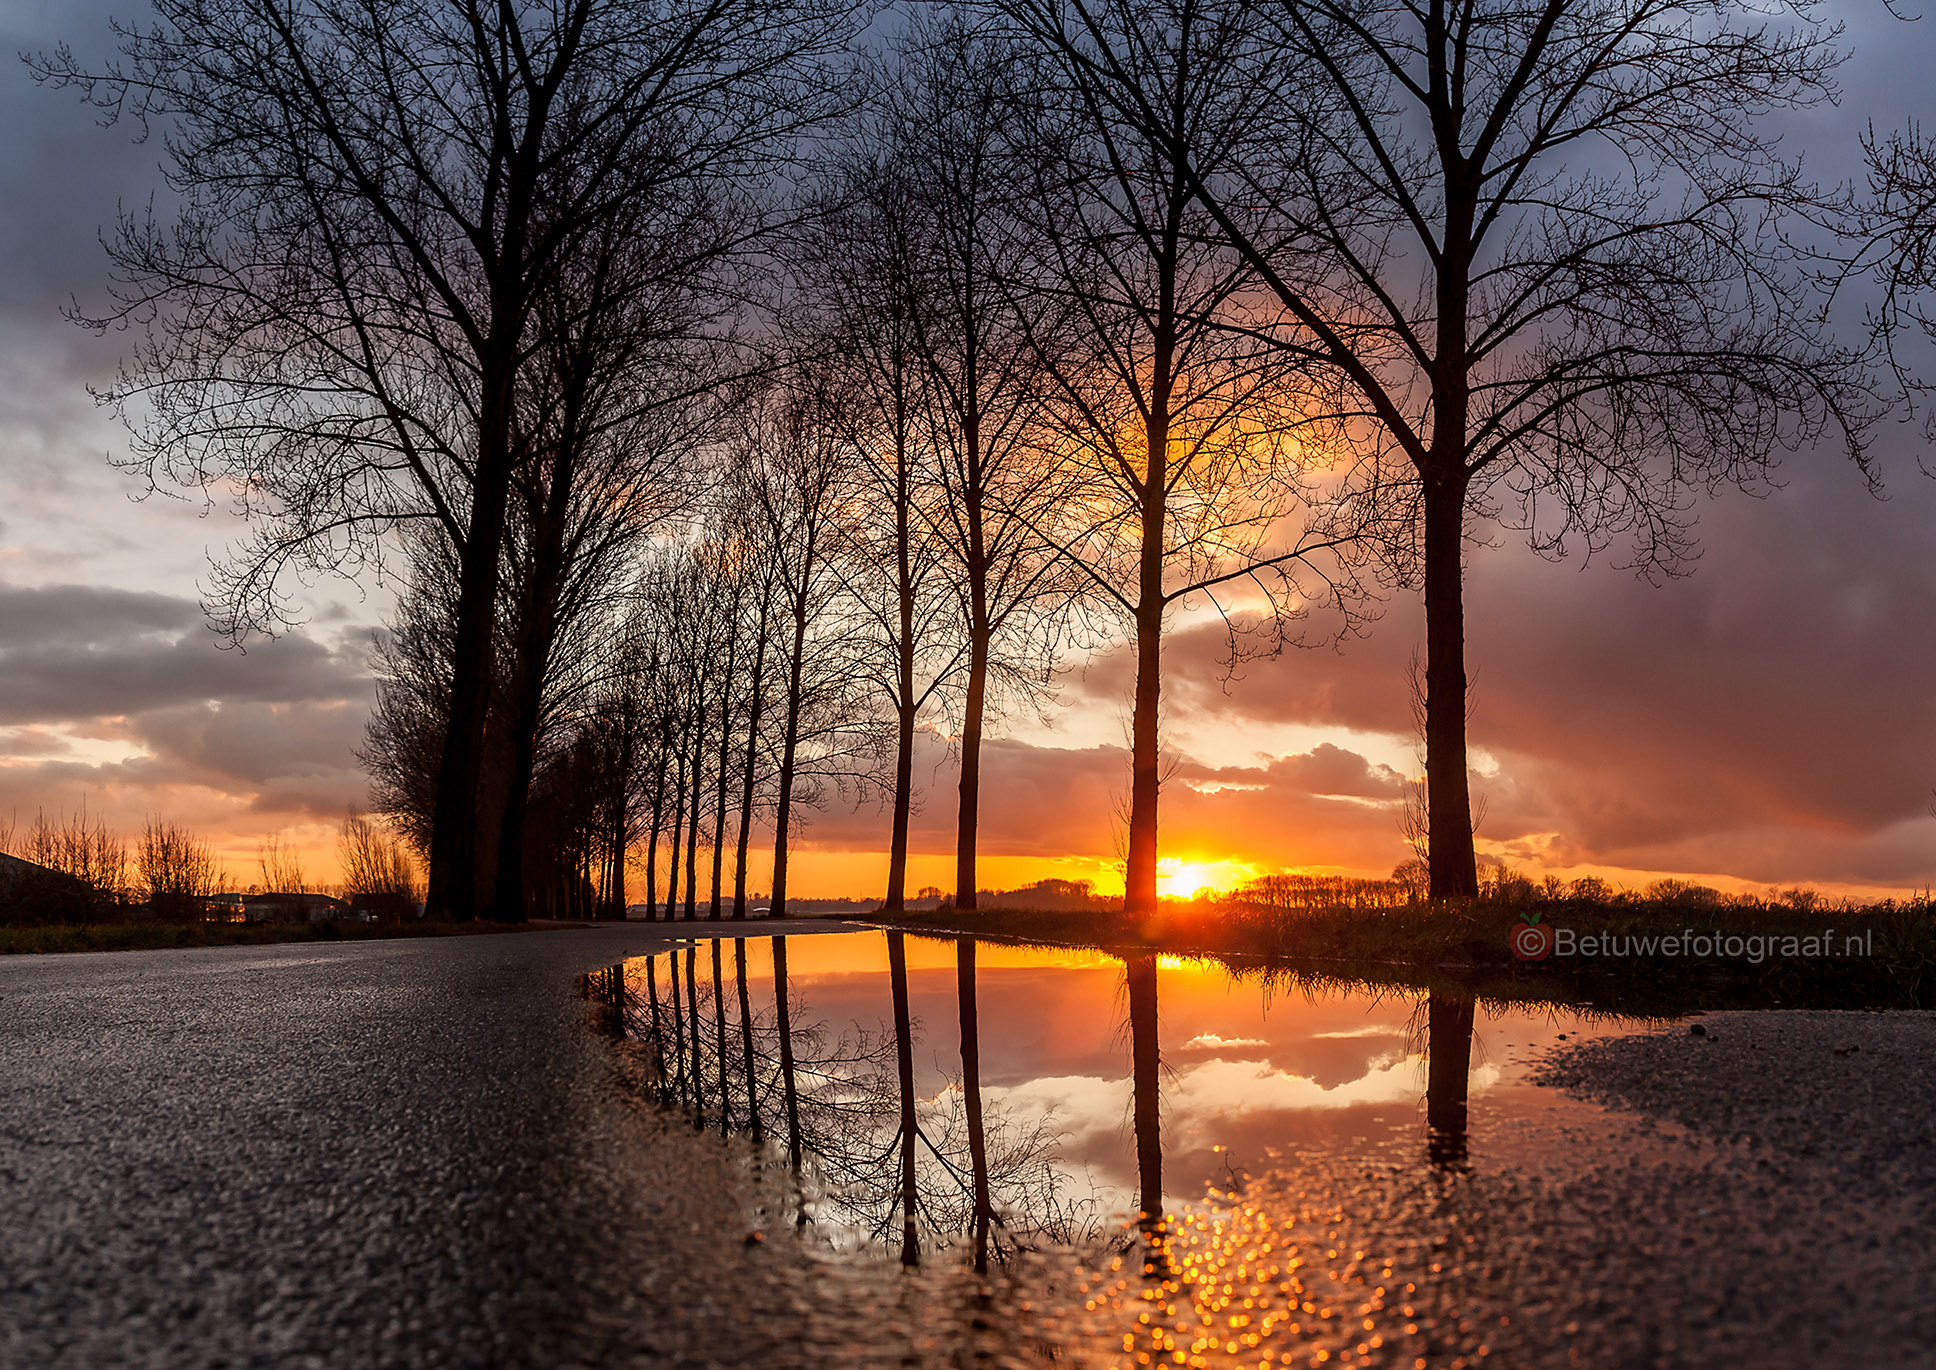 Canon EOS 5D Mark II + Sigma 24-105mm f/4 DG OS HSM | A sample photo. Sunset in a puddle....... photography